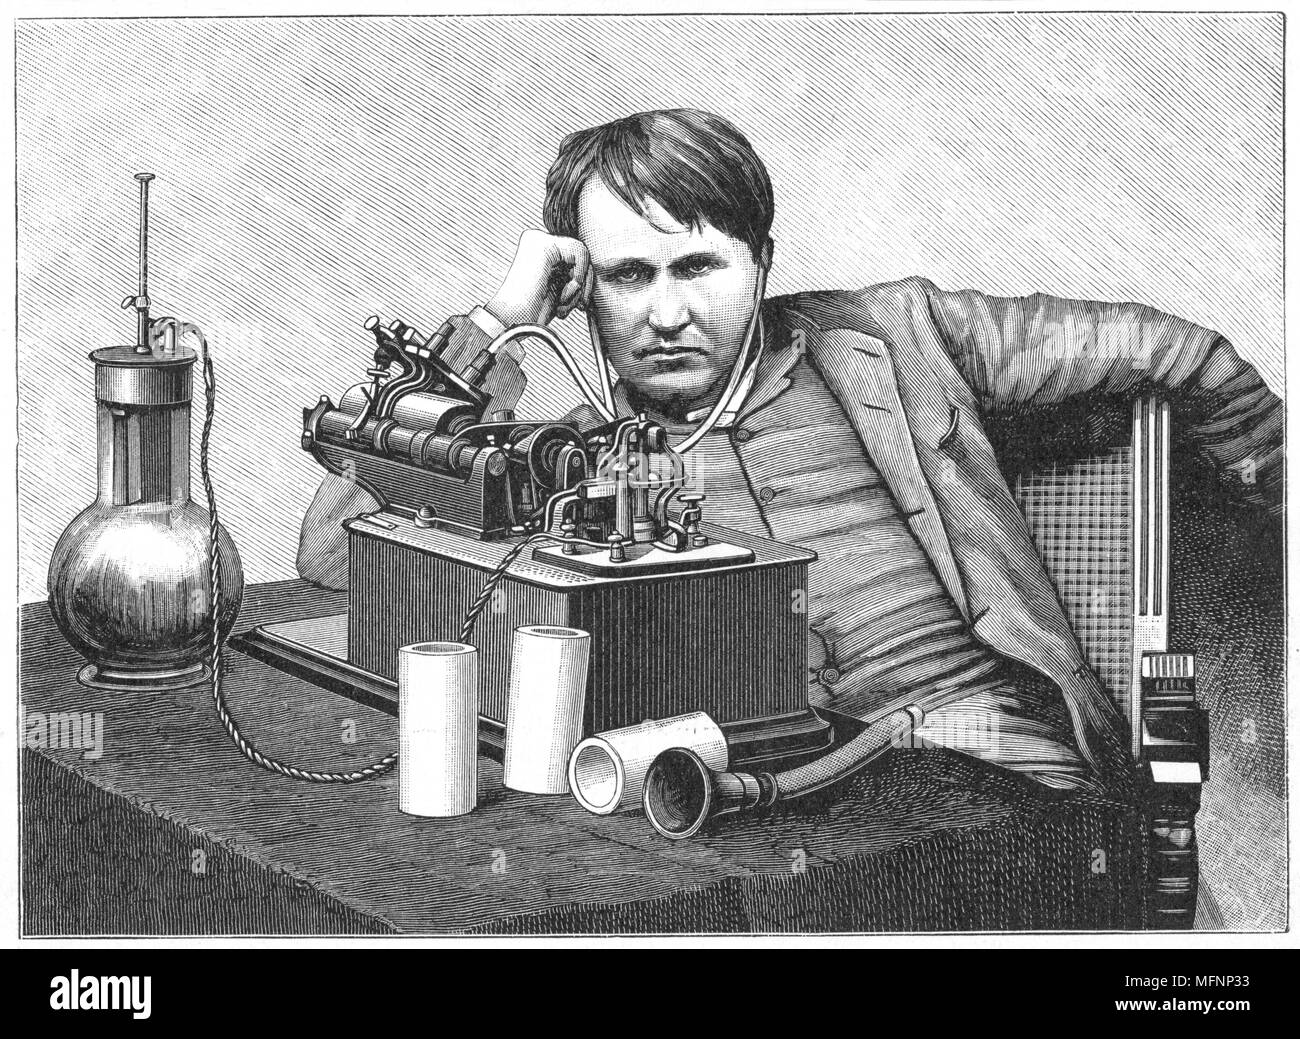 Thomas Alva Edison (1847-1931) American inventor, listening to a recording on his phonograph. This is an electric model powered by a bichromate cell (left), a form of wet battery. Engraving c1895. Stock Photo